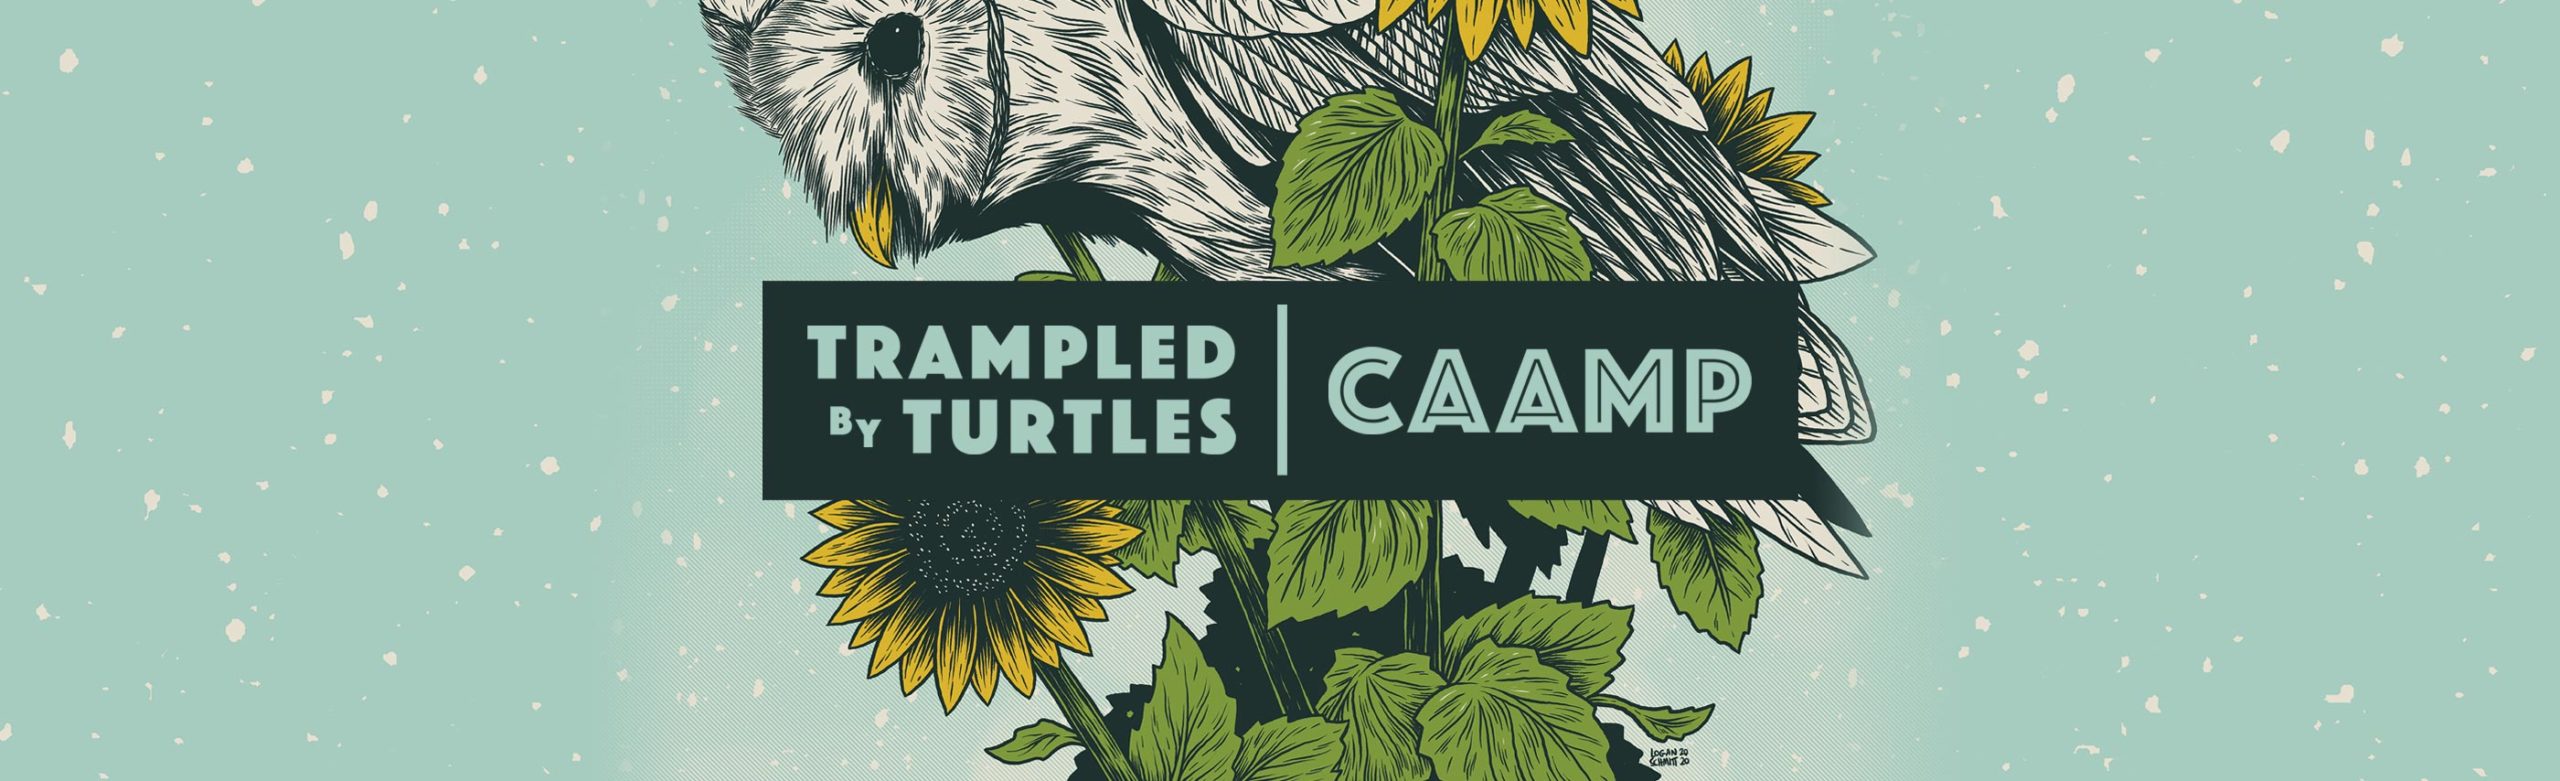 Trampled By Turtles & CAAMP